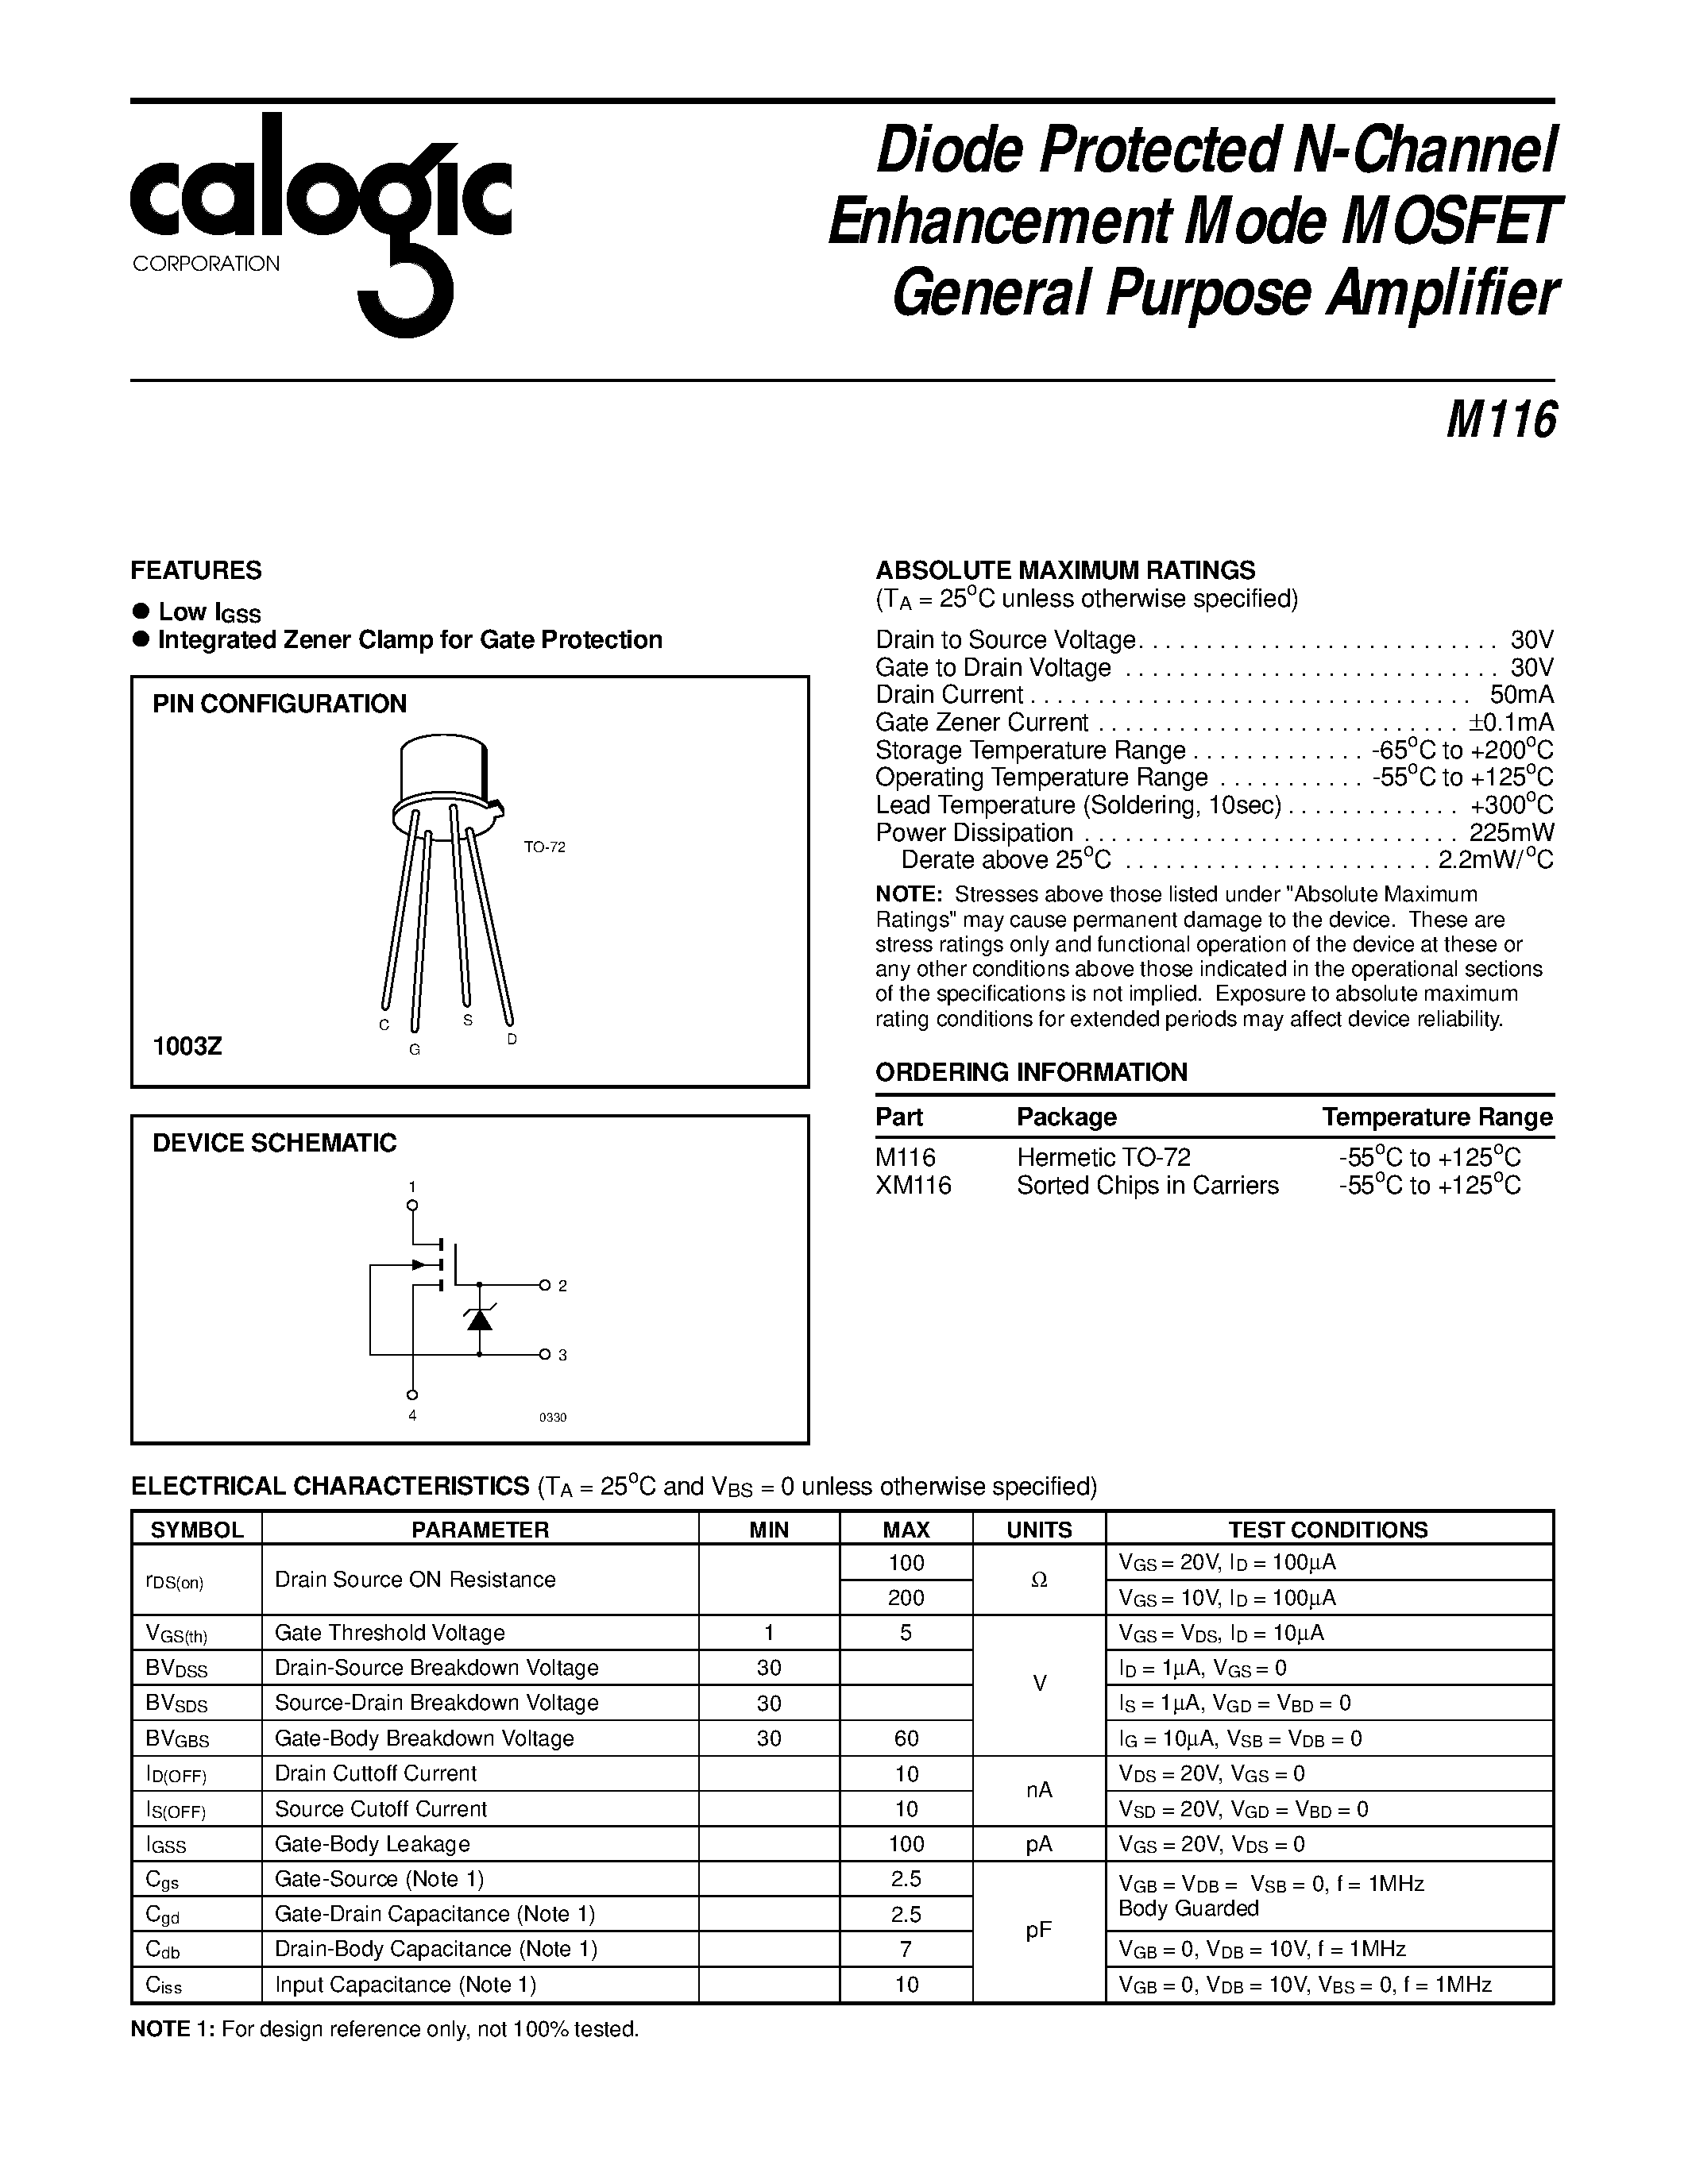 Даташит XM116 - Diode Protected N-Channel Enhancement Mode MOSFET General Purpose Amplifier страница 1